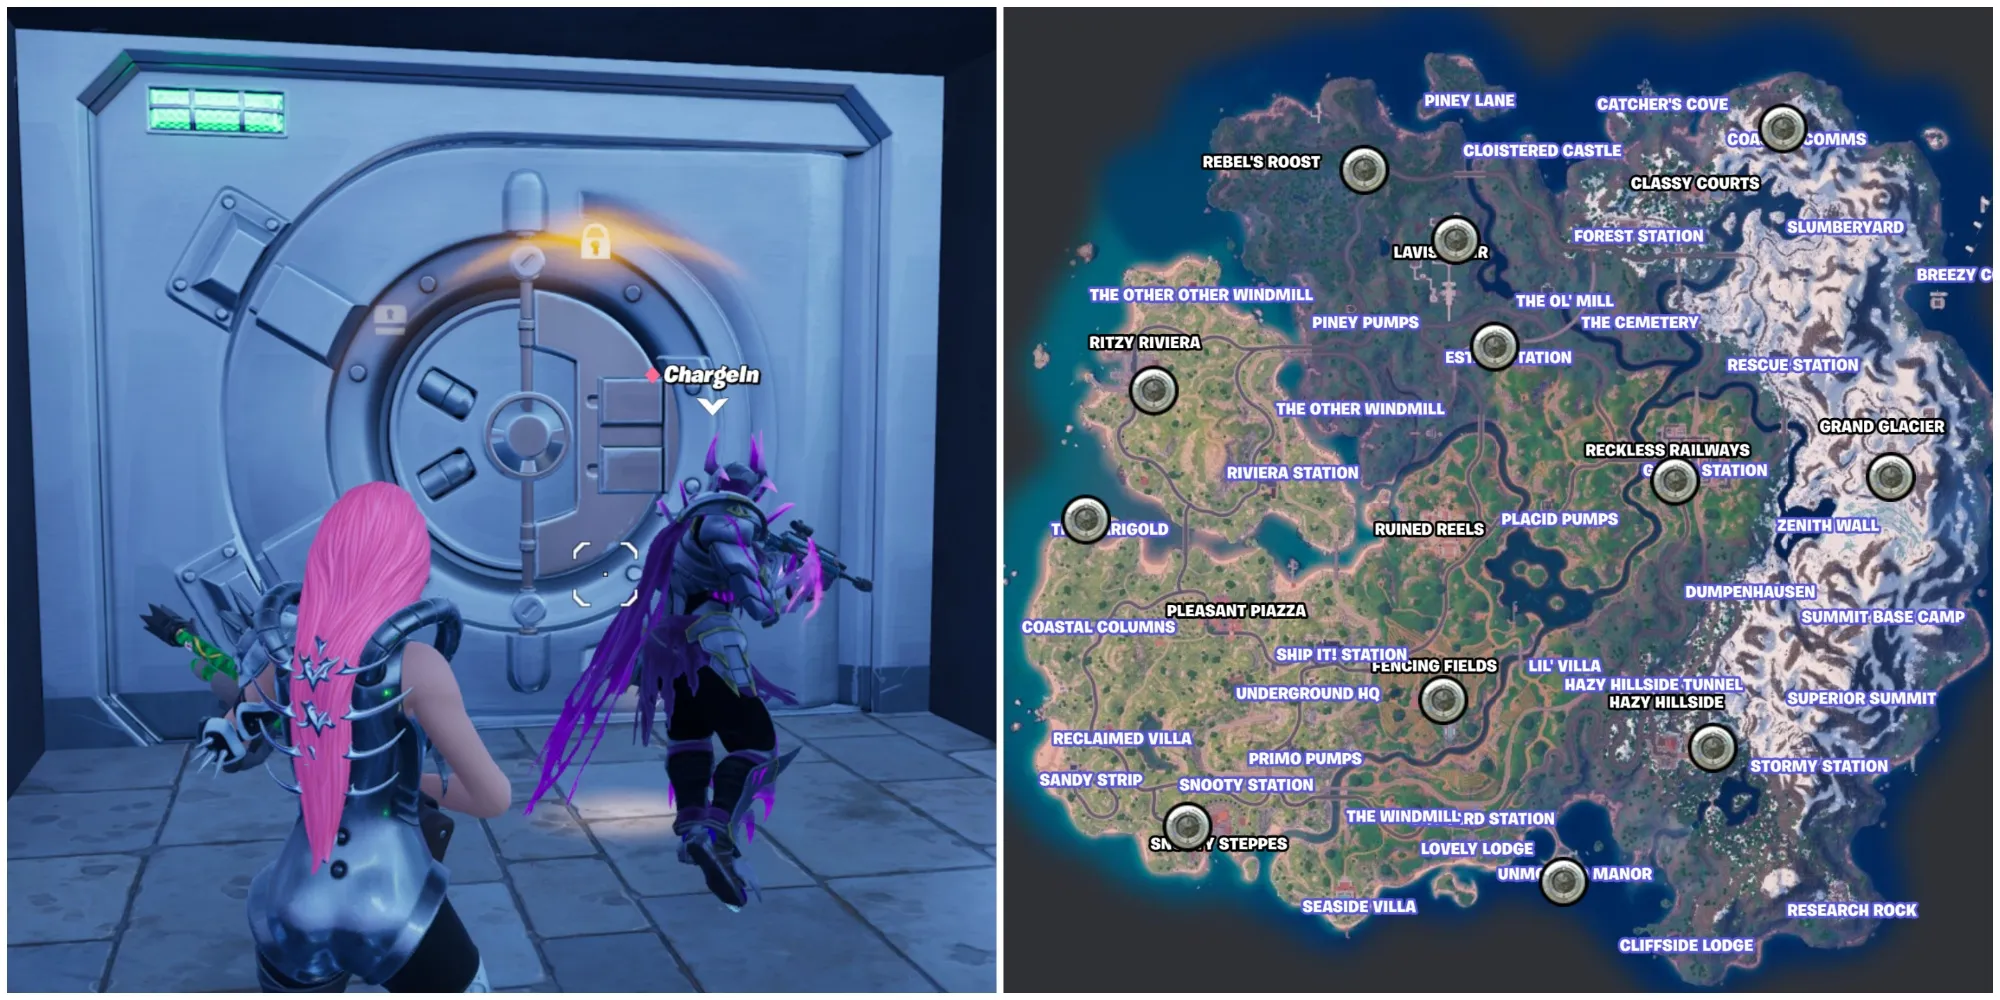 vault entrance and vault locations on map